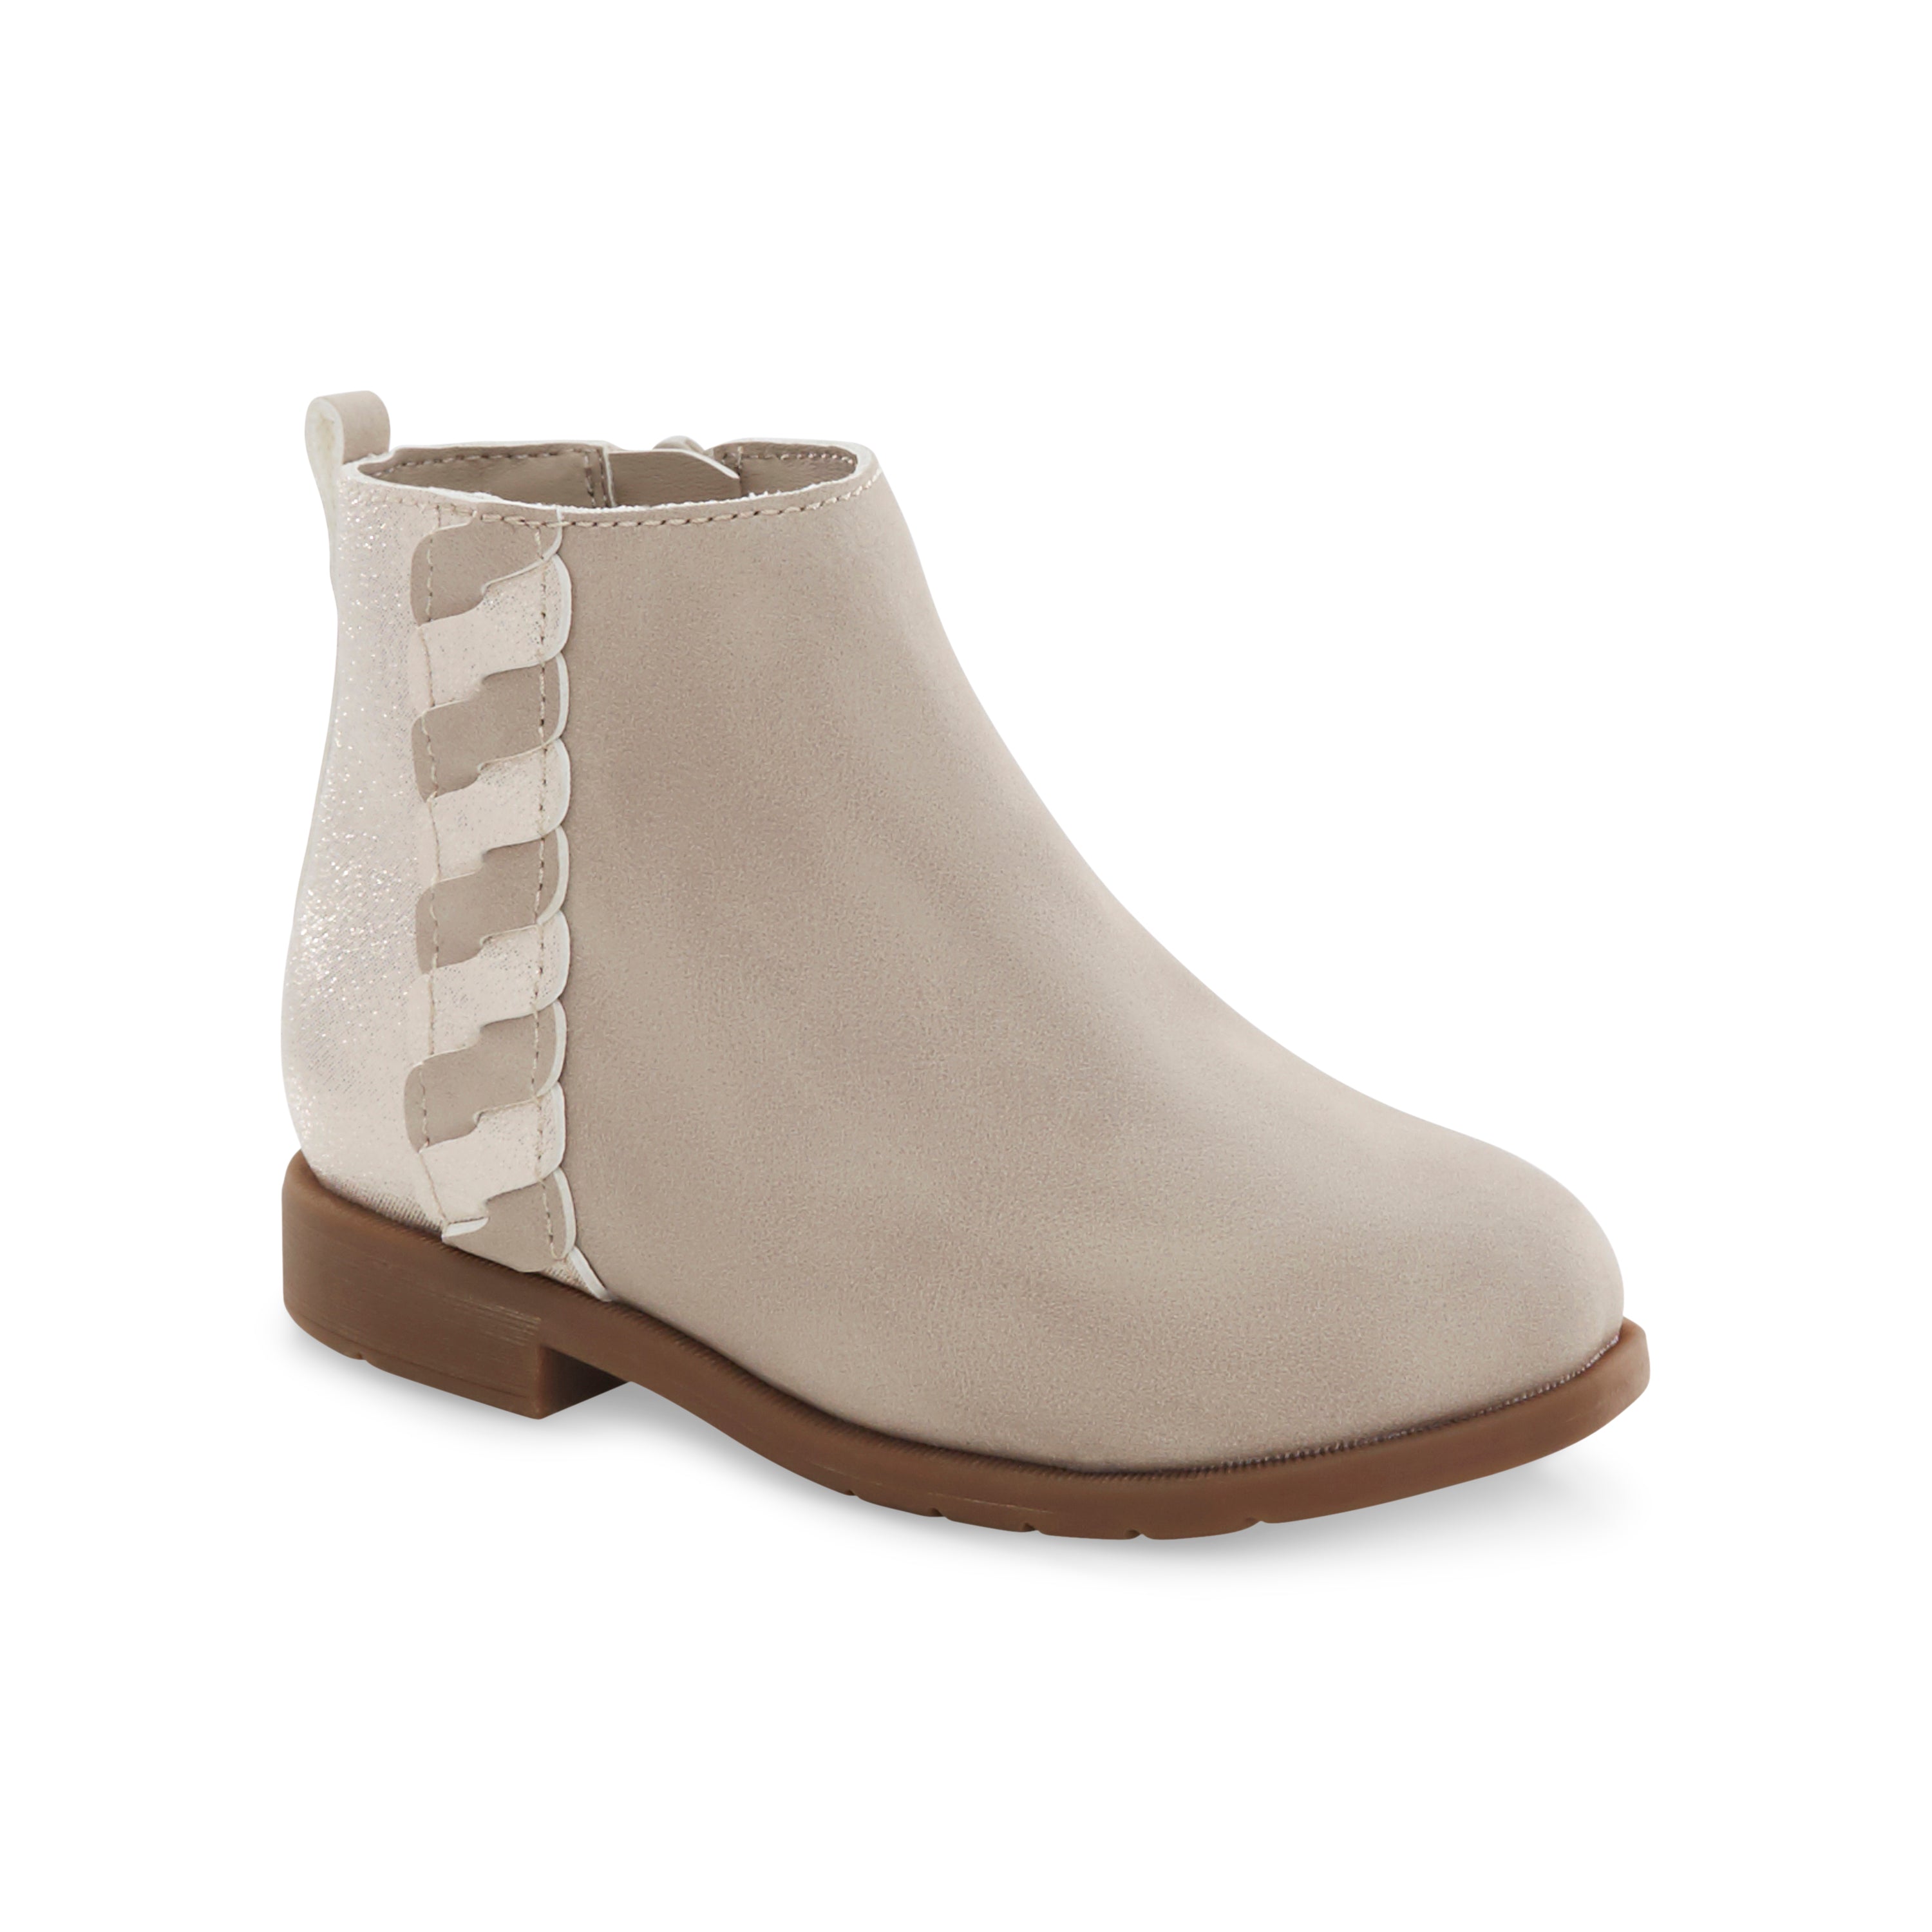 SR Carolyn Kid's Ankle Bootie - Taupe